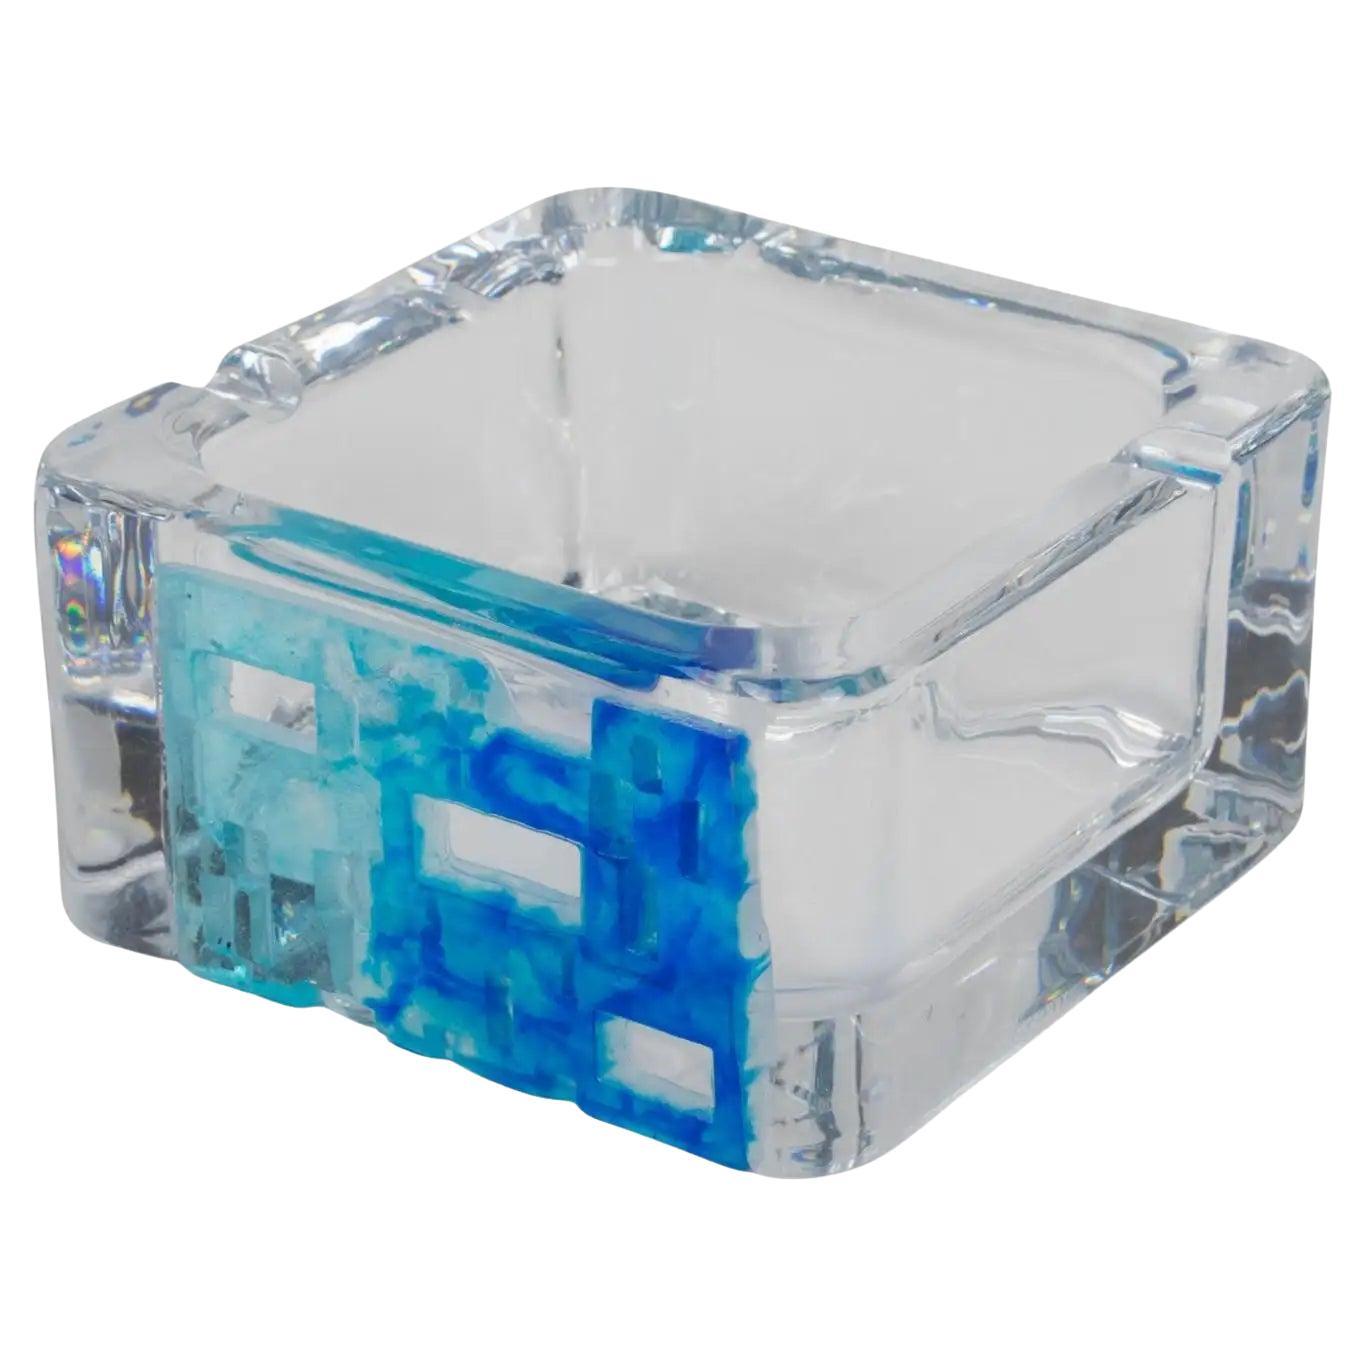 Daum Crystal and Blue Pate de Verre Ashtray Desk Tidy Bowl Catchall